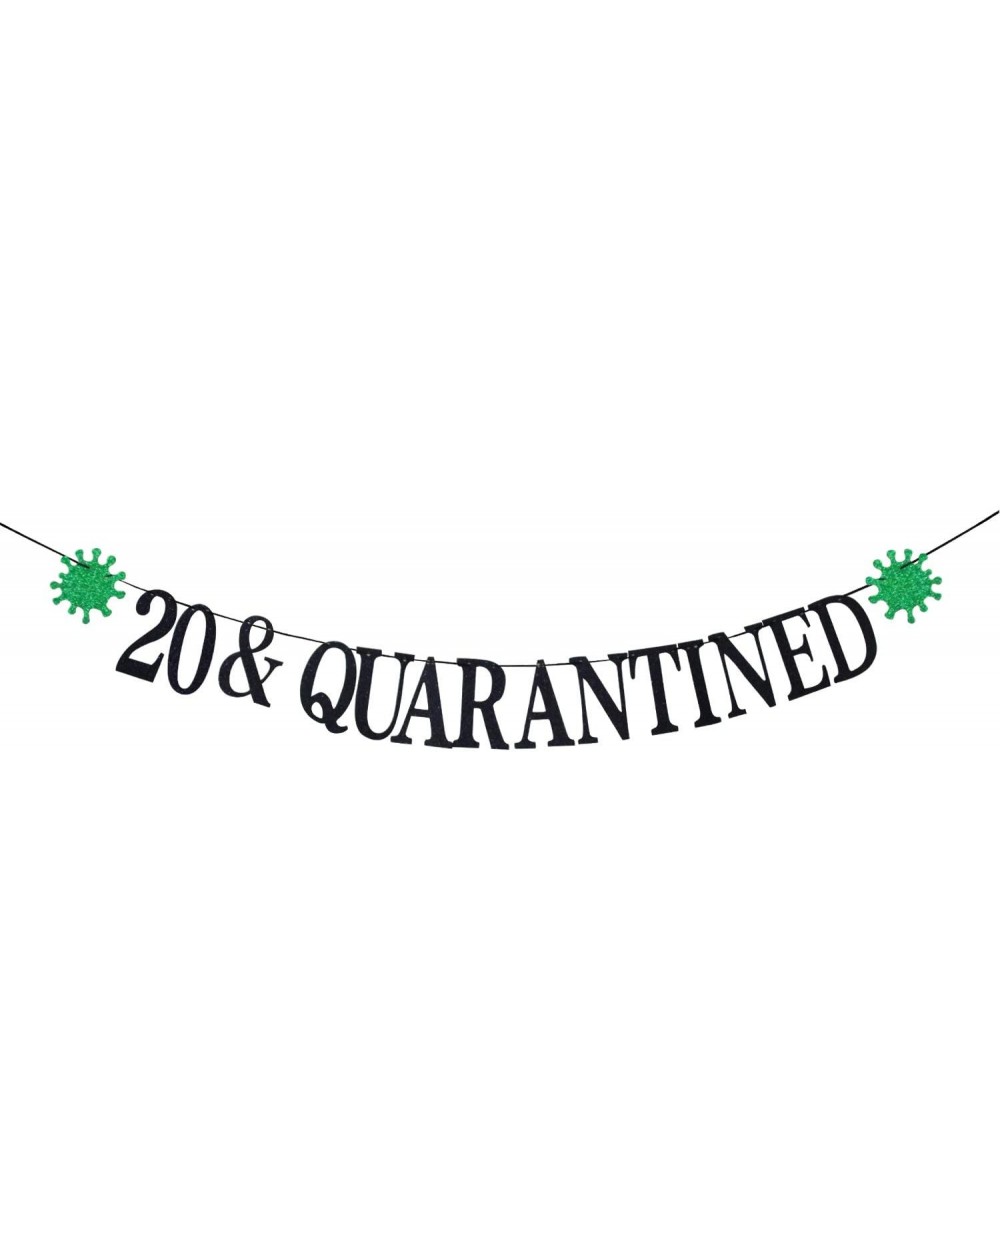 Banners & Garlands Black Glitter 20&Quarantined Banner - Hanging Paper Garlands for Happy 20th Birthday Party Decor/Cheers to...